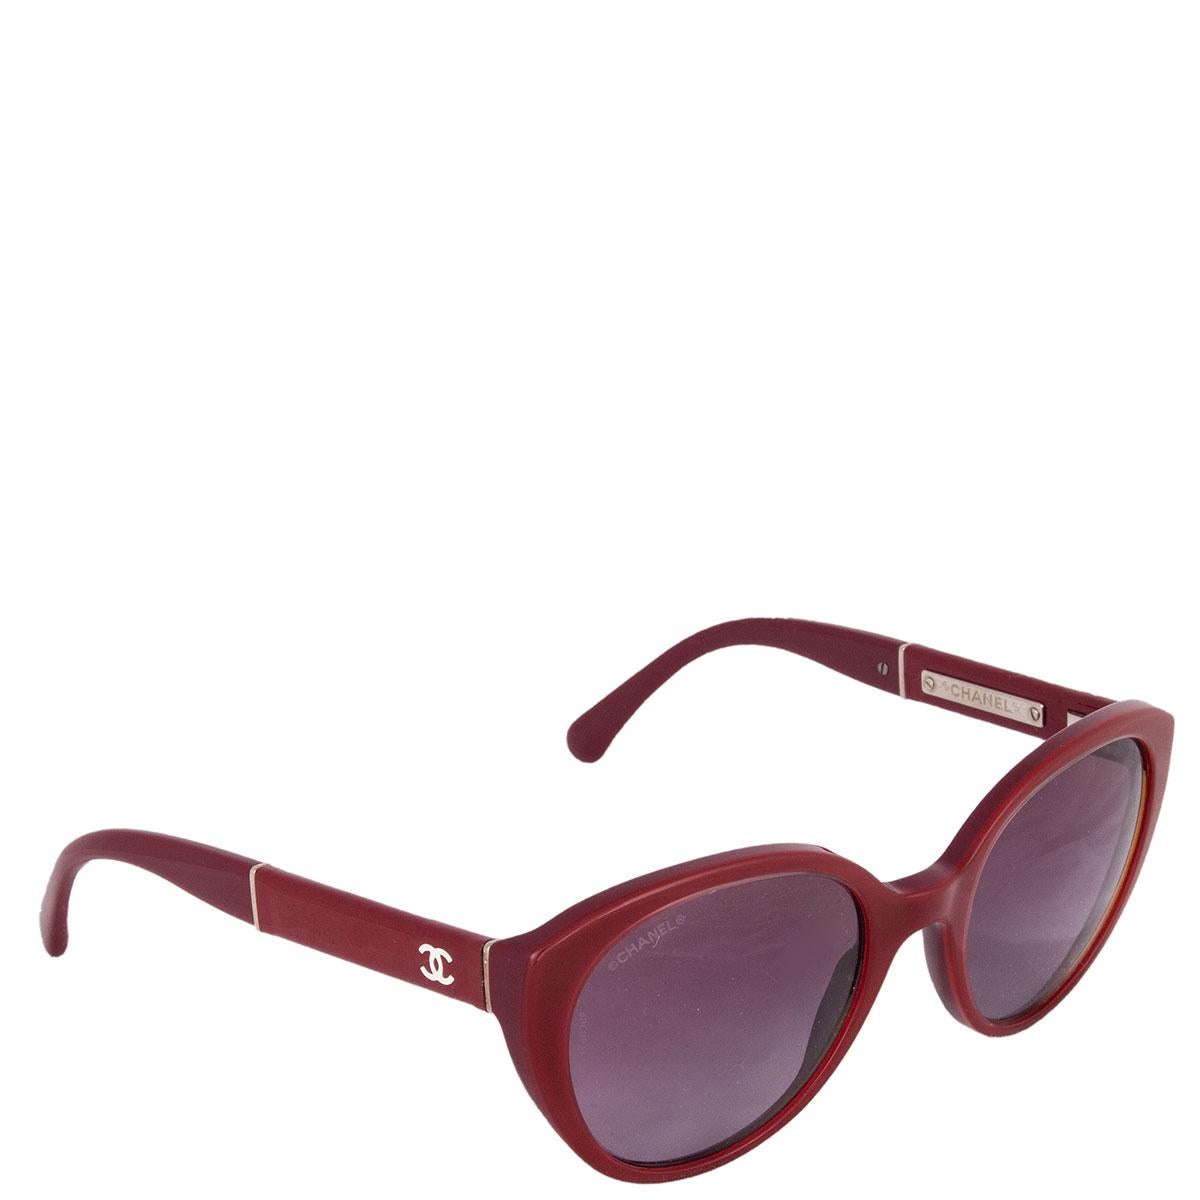 100% authentic Chanel sunglasses in burgundy acetate with light burgundy gradient round lenses. Have been worn and are in excellent condition. Comes with case. 

Model 5252Q
Width 13cm (5.1in)
Height 5cm (2in)

All our listings include only the